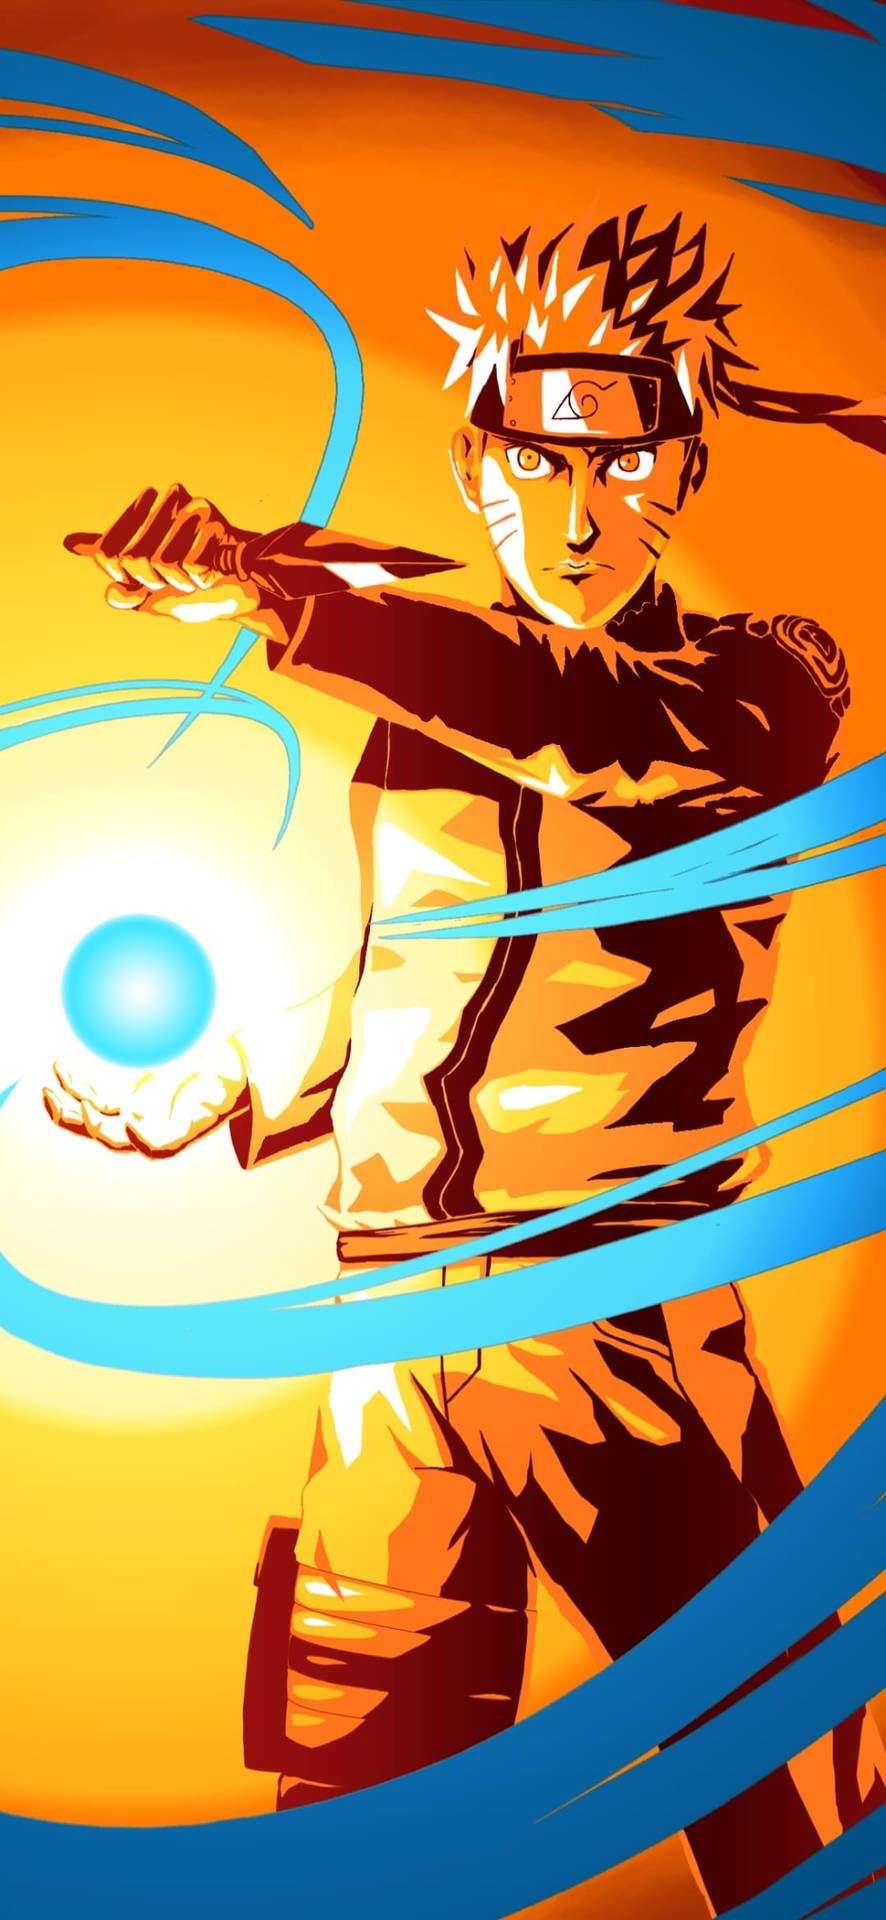 Brighten Up Your Day with Yellow Naruto Wallpaper